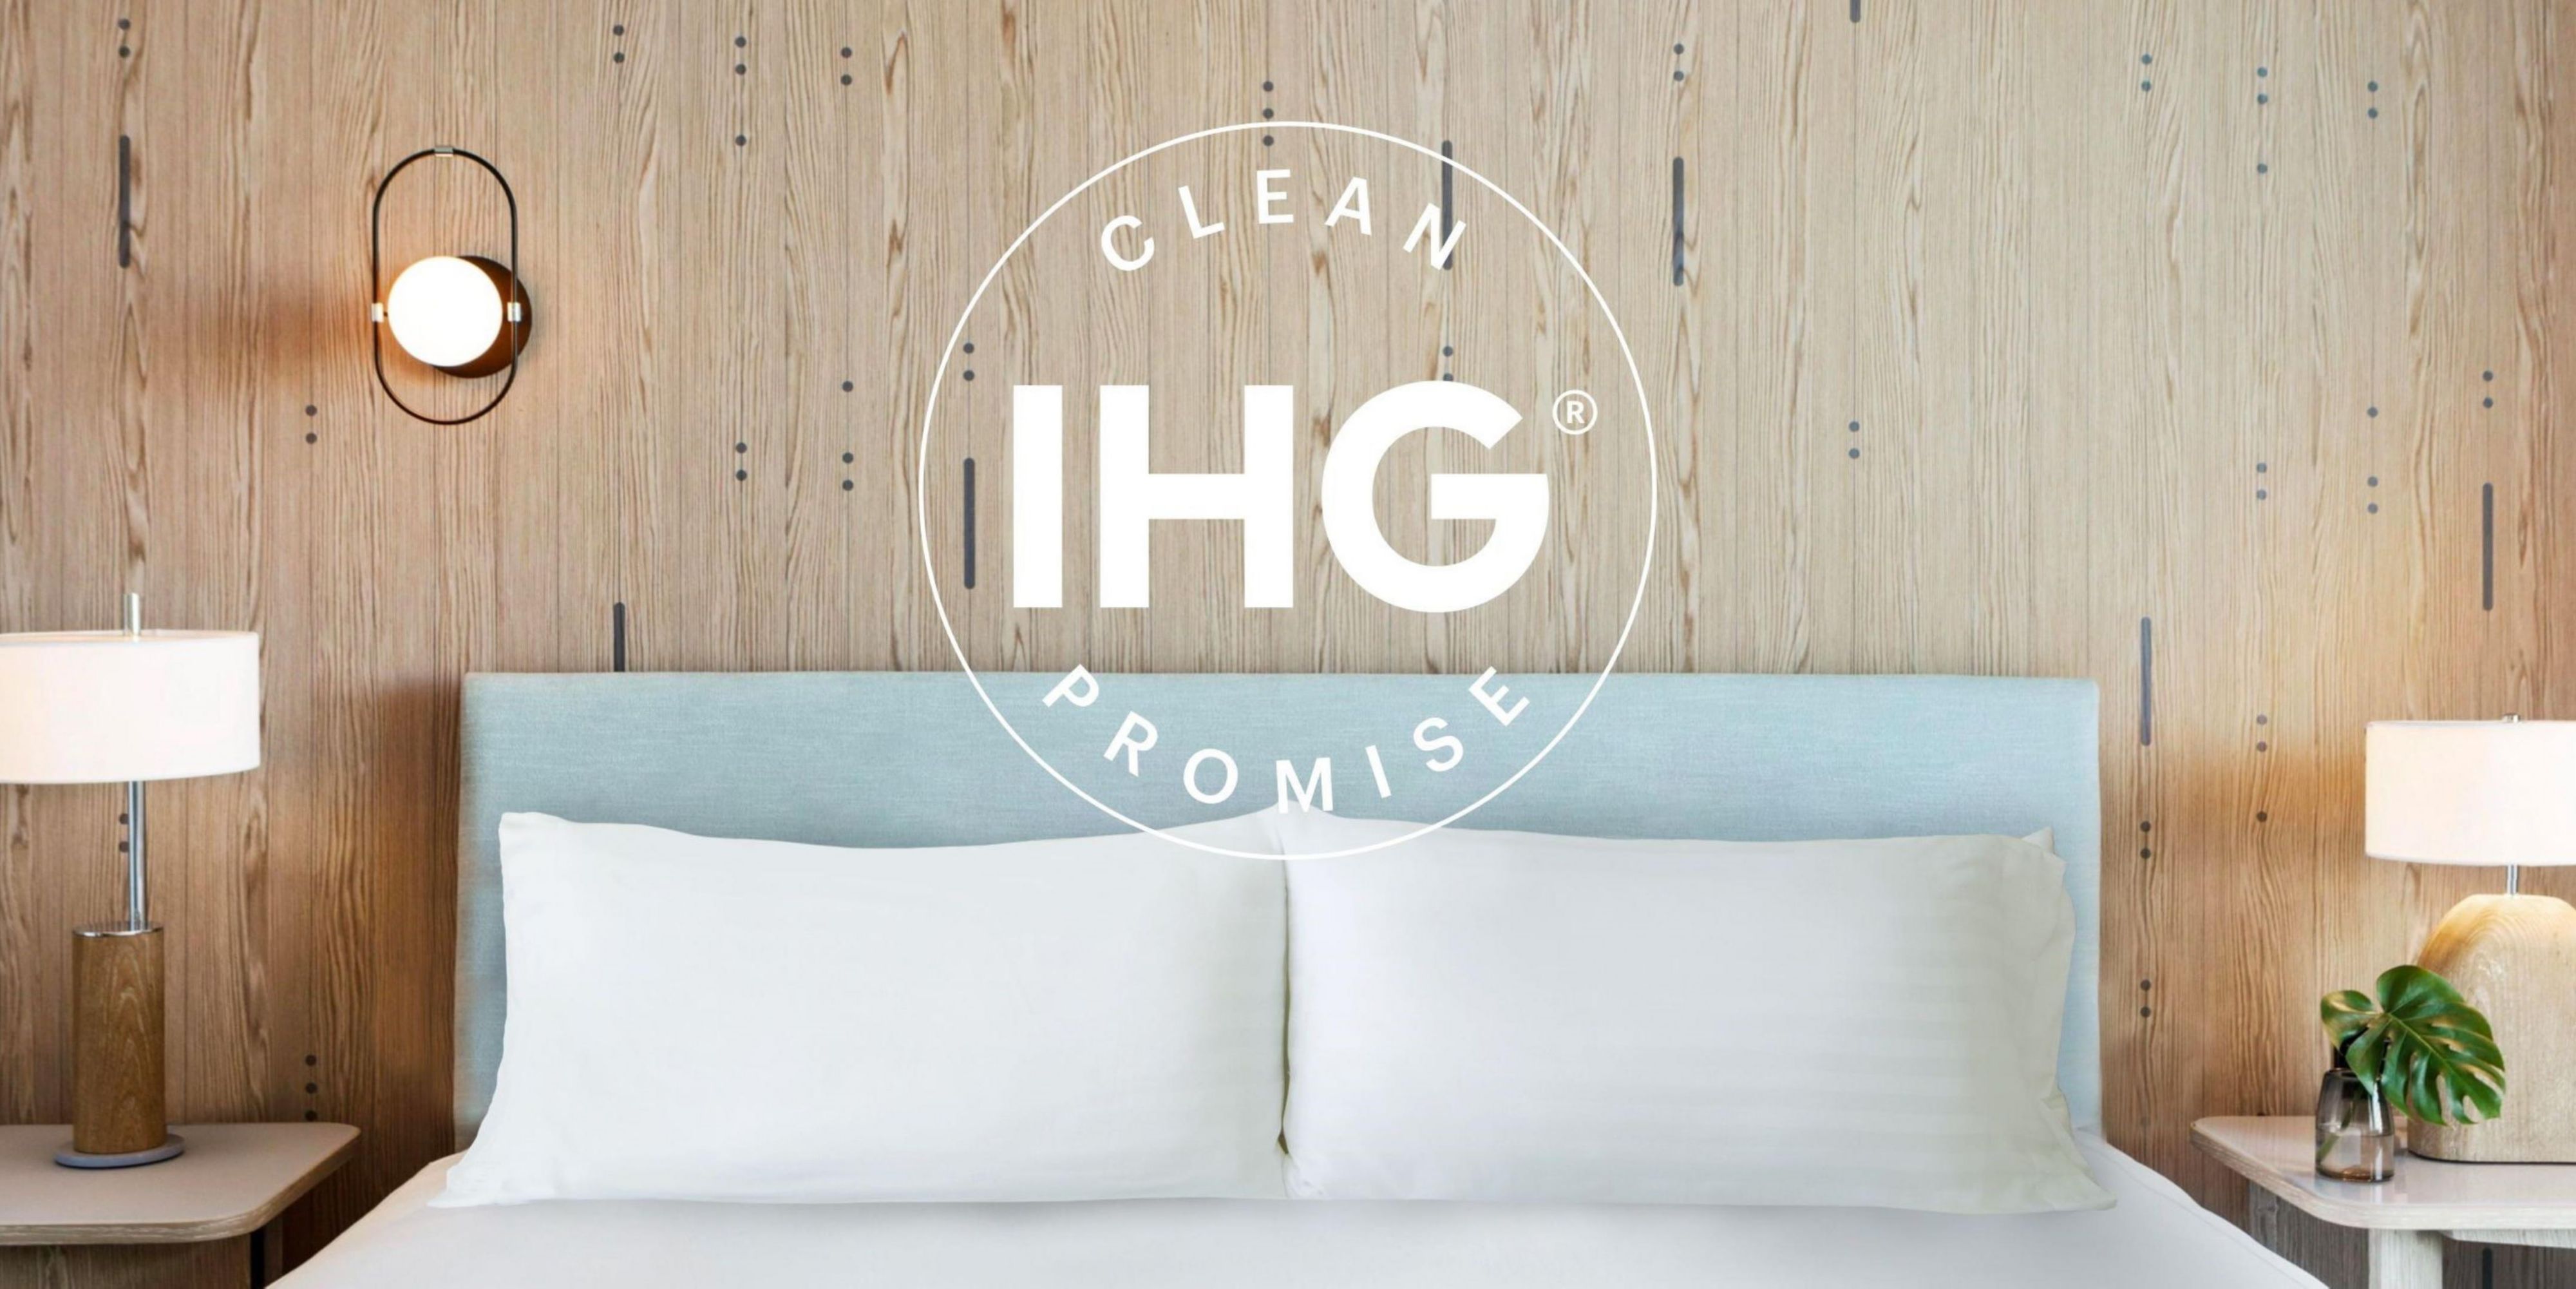 When you're ready to travel, we'll be ready to welcome you. We have expanded our commitment to cleanliness with hospital grade disinfectants.
